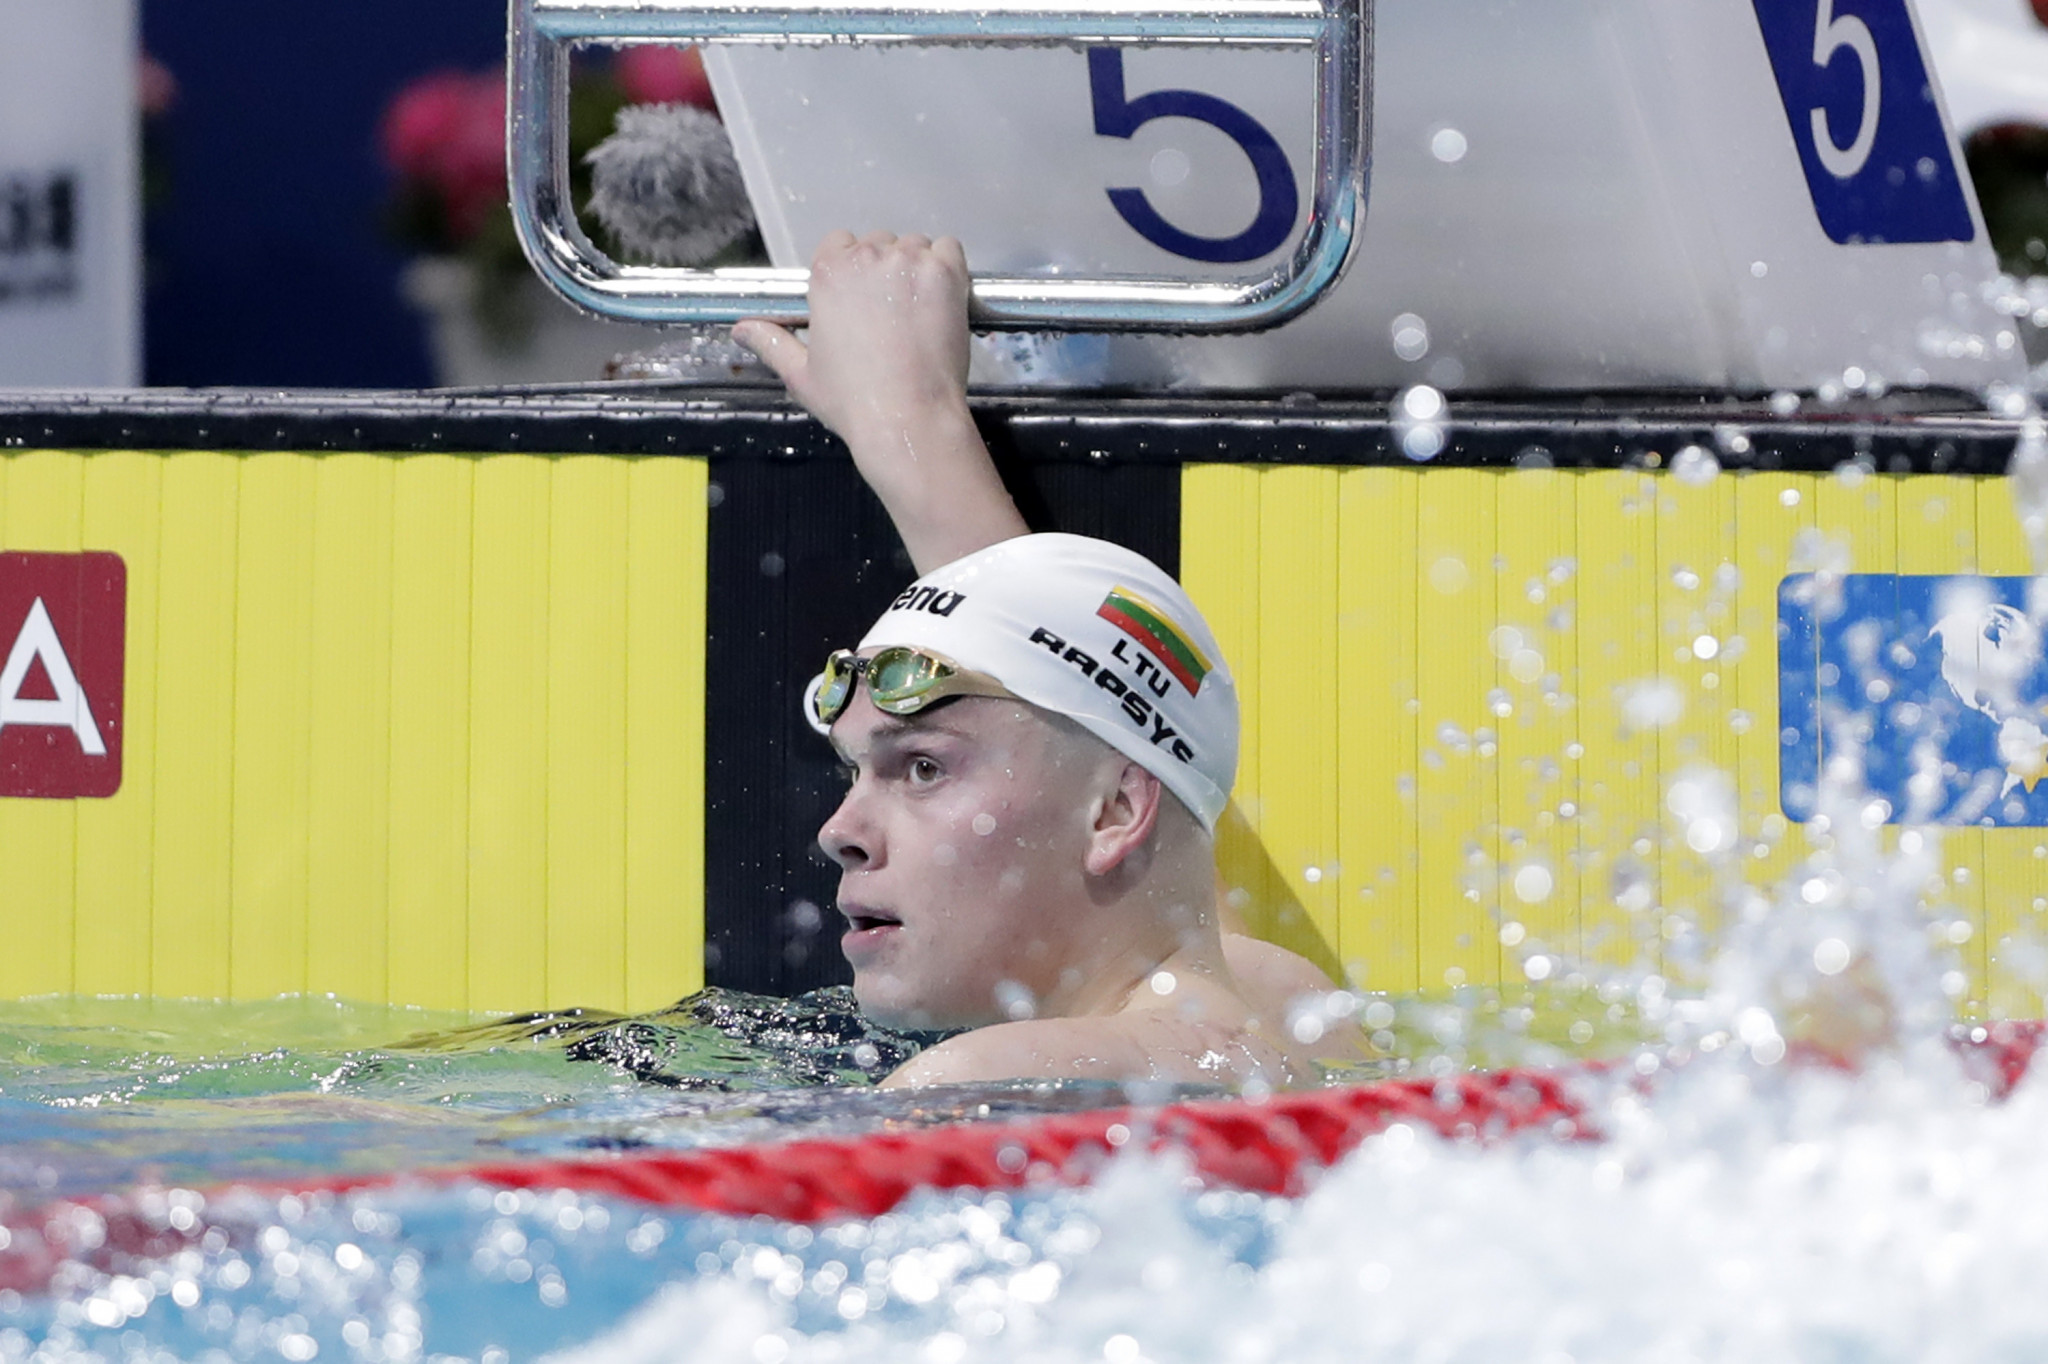 Rapšys claims second gold as records fall at FINA Swimming World Cup